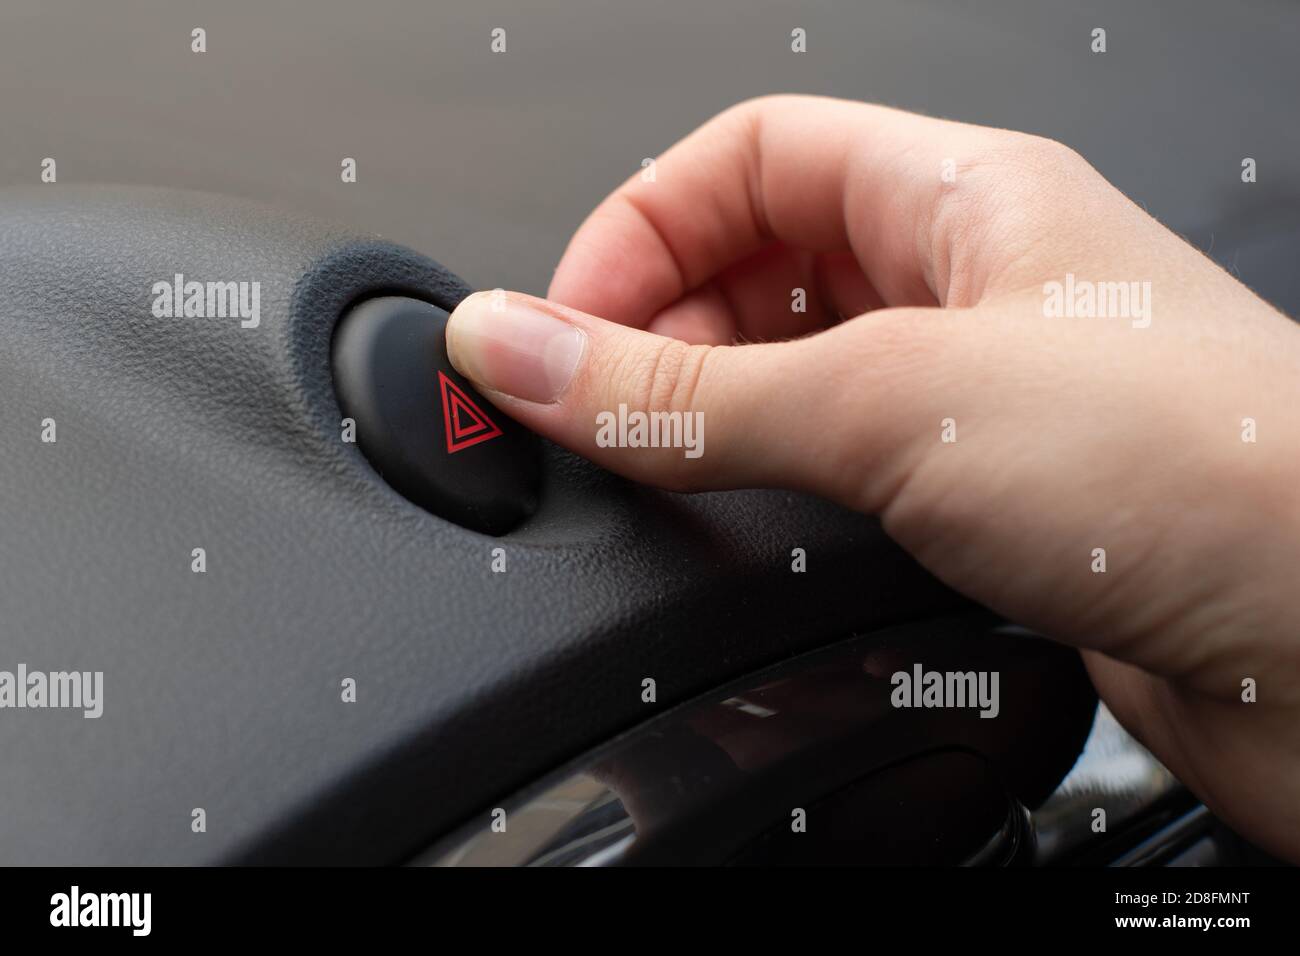 Closeup hand presses emergency stop button, road accident, danger and warning motorists on highway while traveling Stock Photo